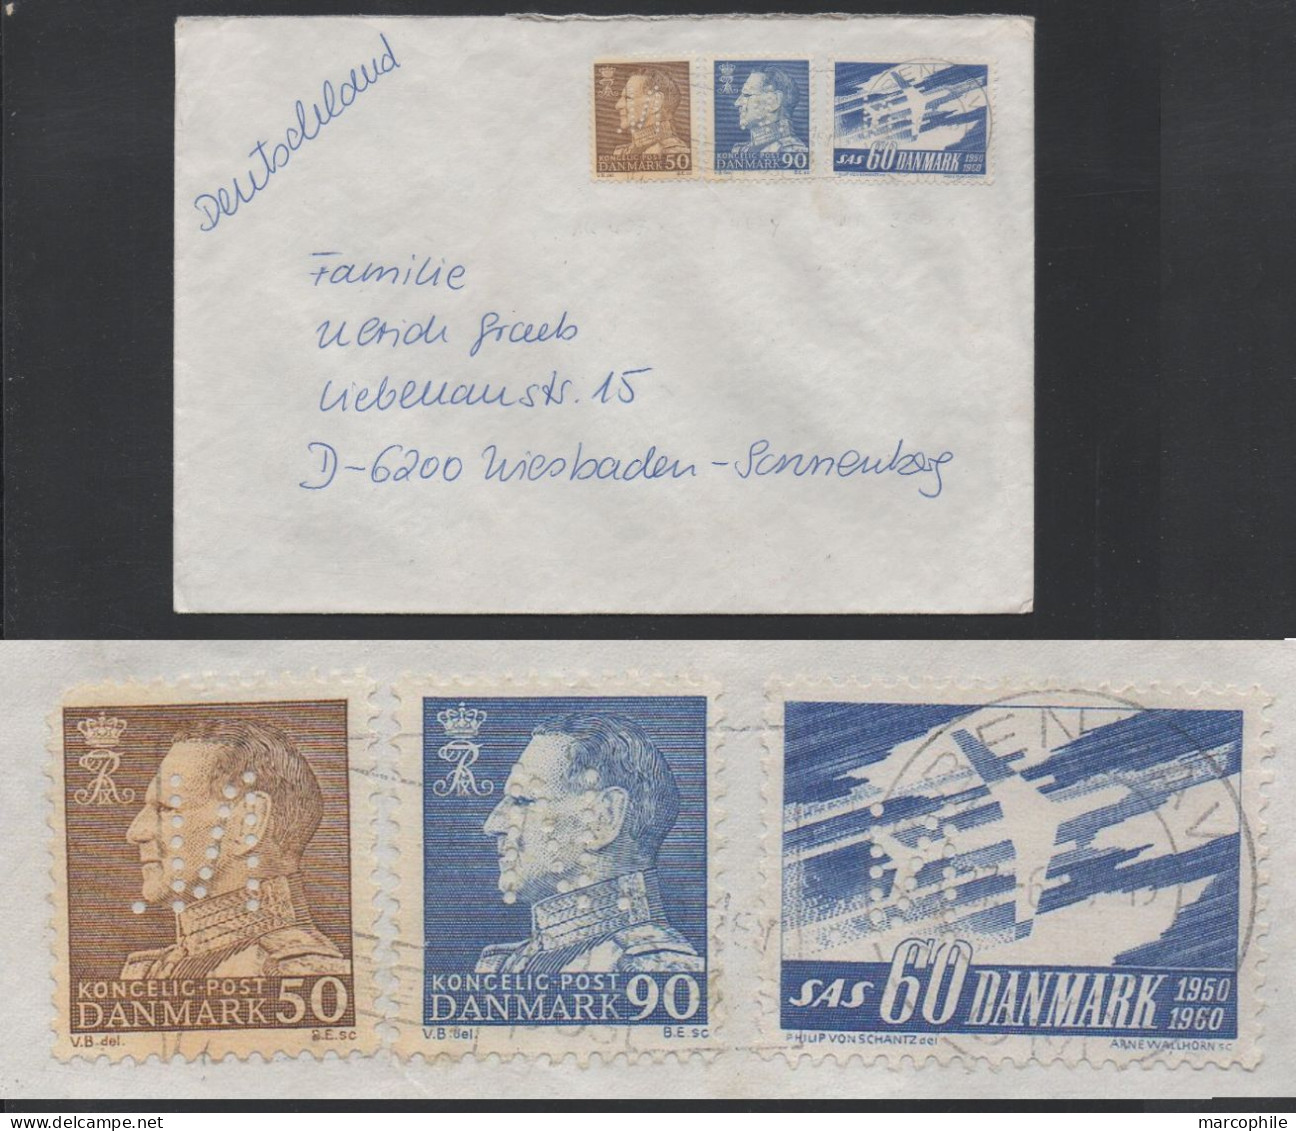 DANEMARK - DANMARK / PERFIN "N." SUR 3 TIMBRES SUR LETTRE ==> ALLEMAGNE - PERFORE - LOCHUNG (ref 9158) - Covers & Documents